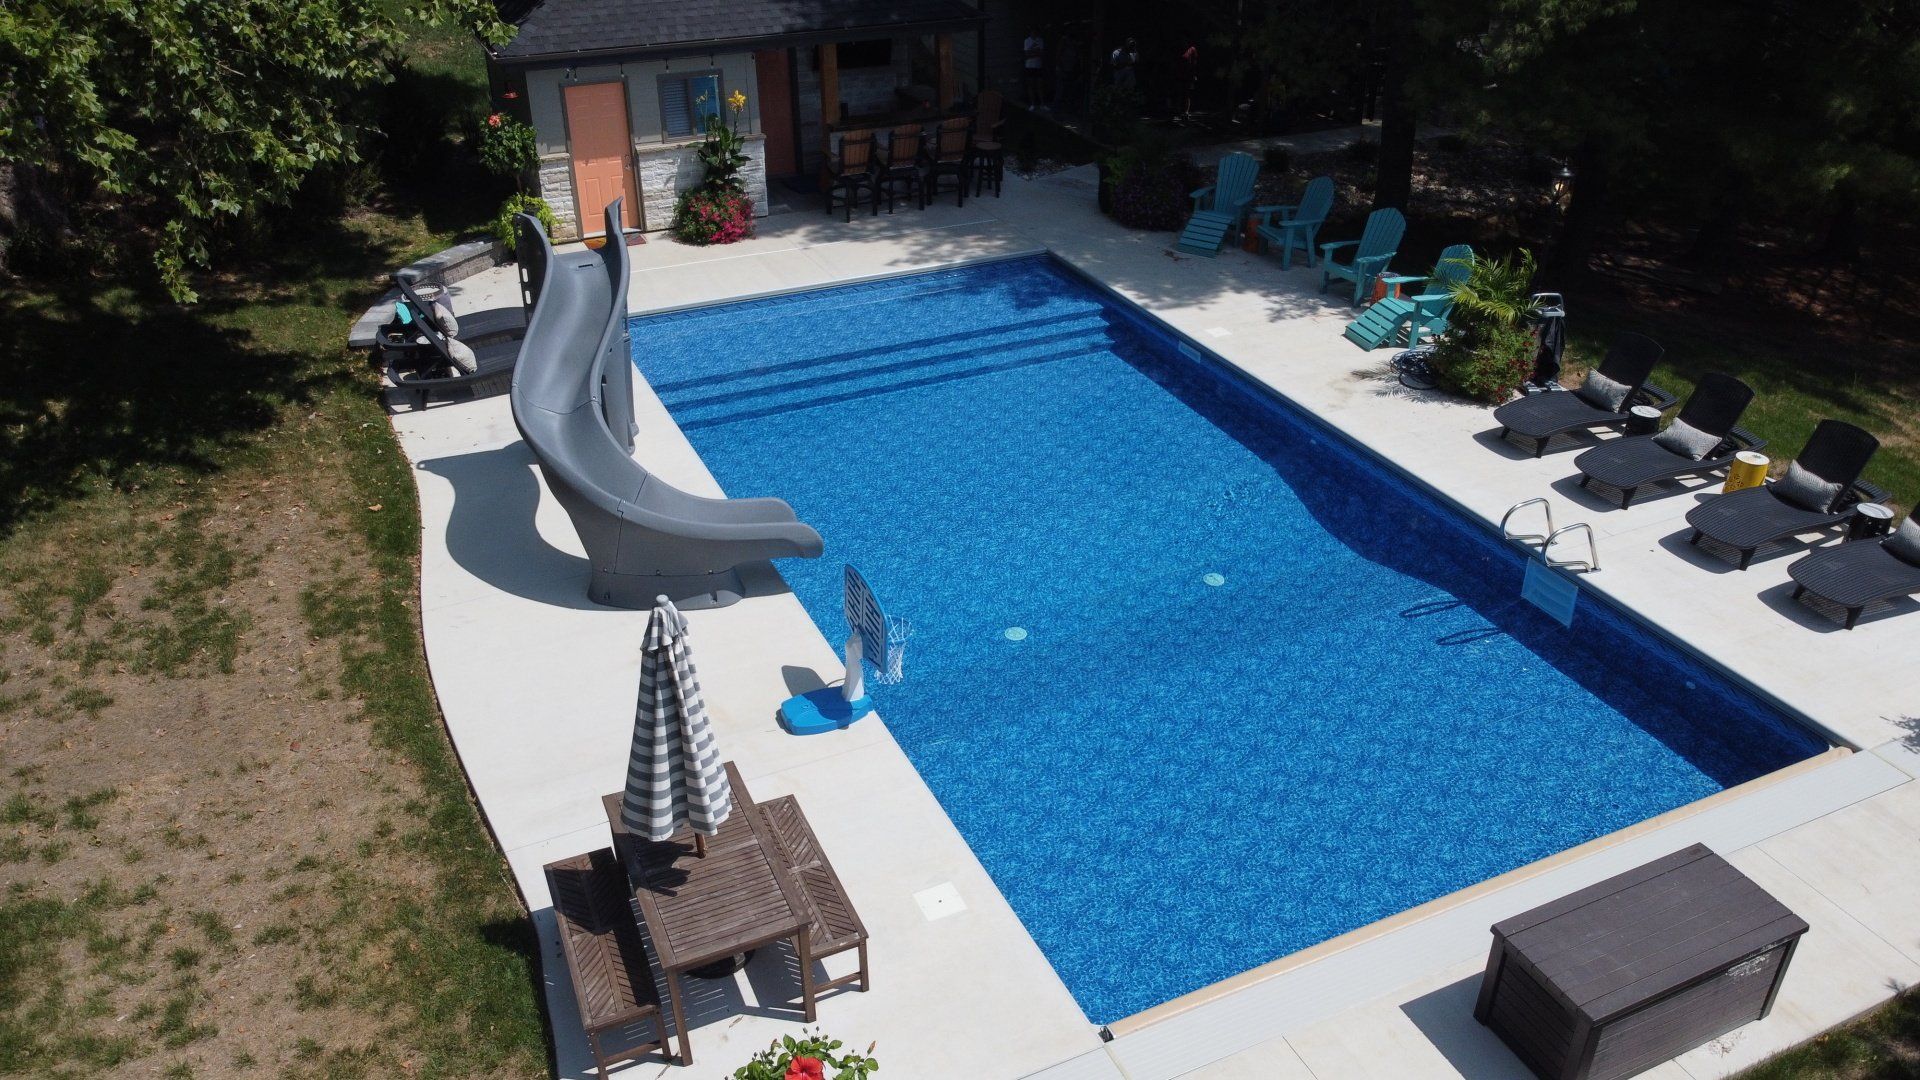 Build a Beautiful Vinyl Liner Inground Pool With Peavler Construction in Columbia, Missouri.